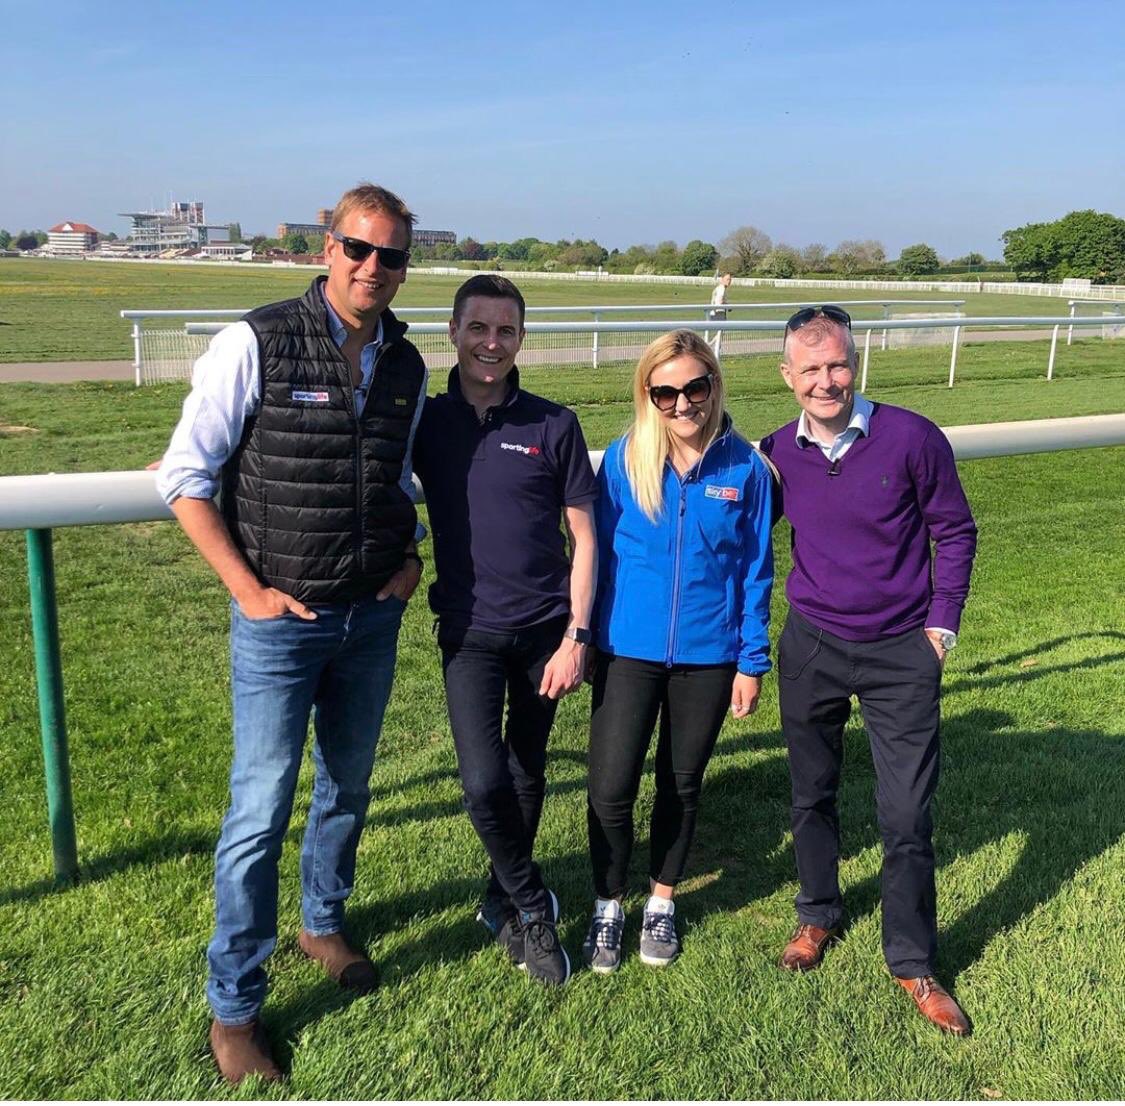 I feel truly lucky to have spent the day with the inspiring @patjsmullen when he flew over to walk @yorkracecourse with me ahead of my charity ride in memory of my dad who lost his battle with @PancreaticCanUK. A day I will never forget. Thoughts with @francescrowley & family 💜